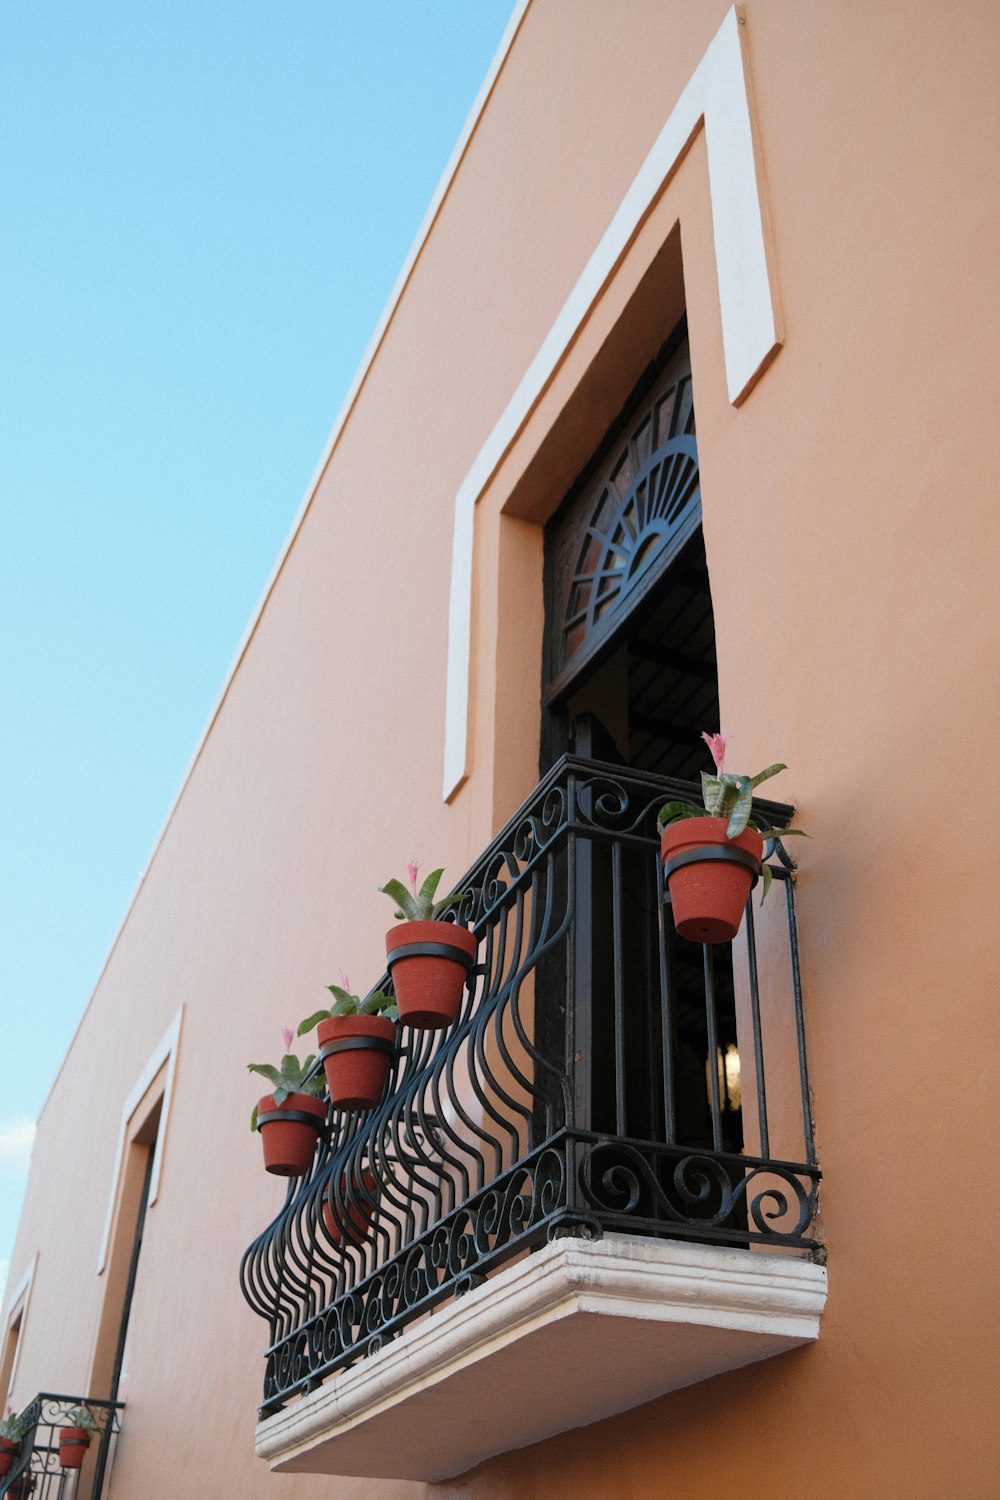 a balcony with potted plants on the balconies